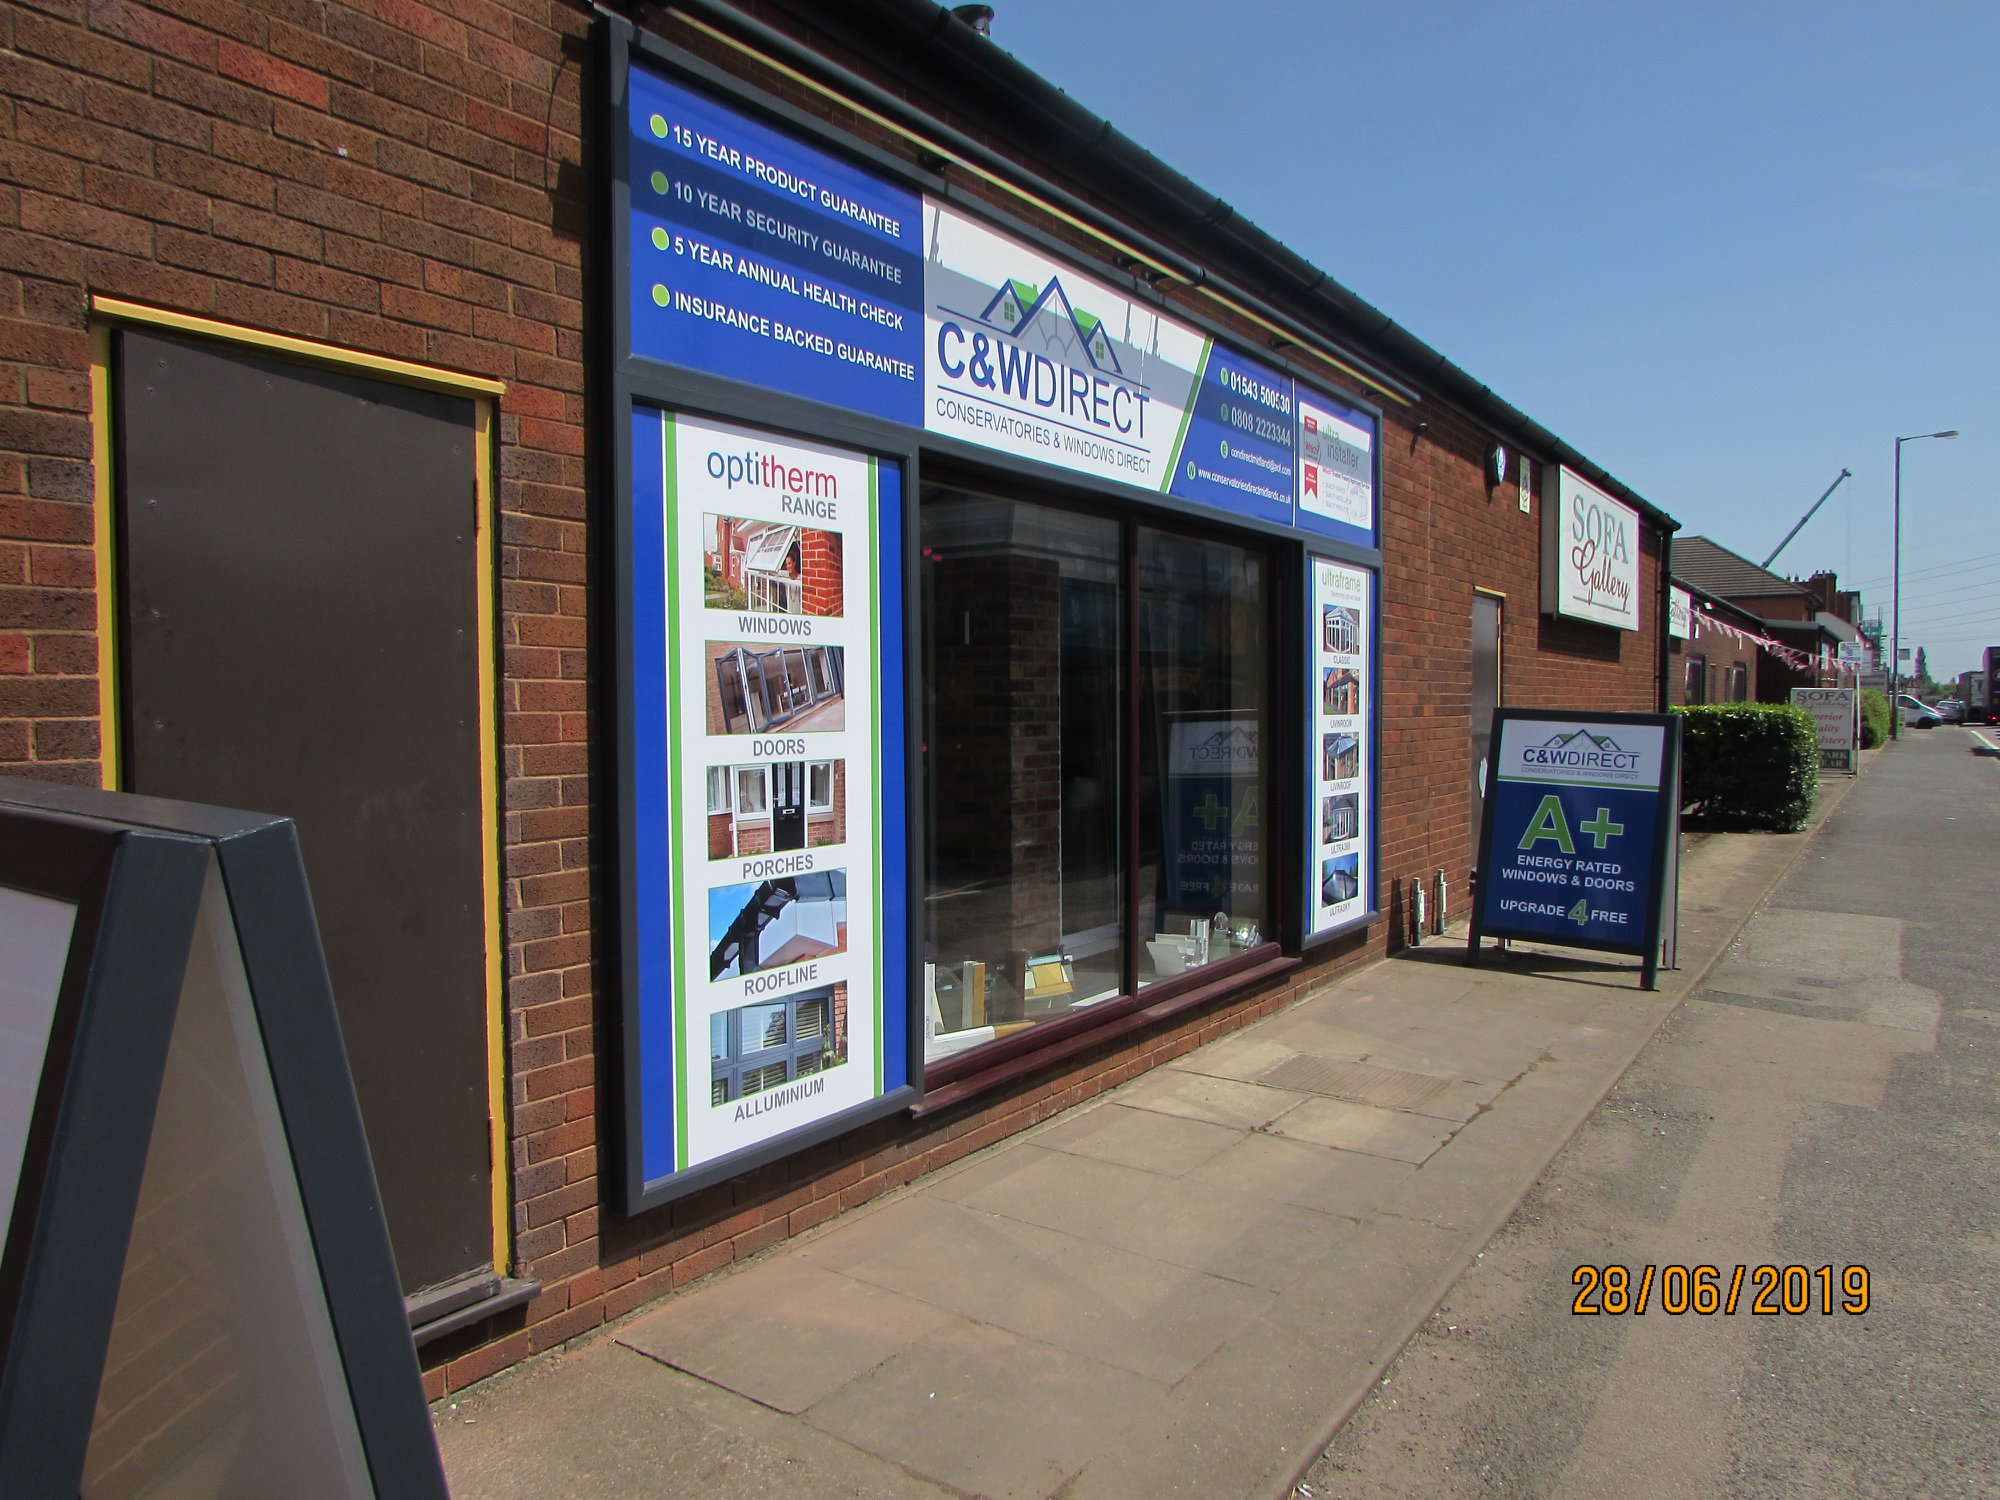 C&W Direct showroom view from the outside